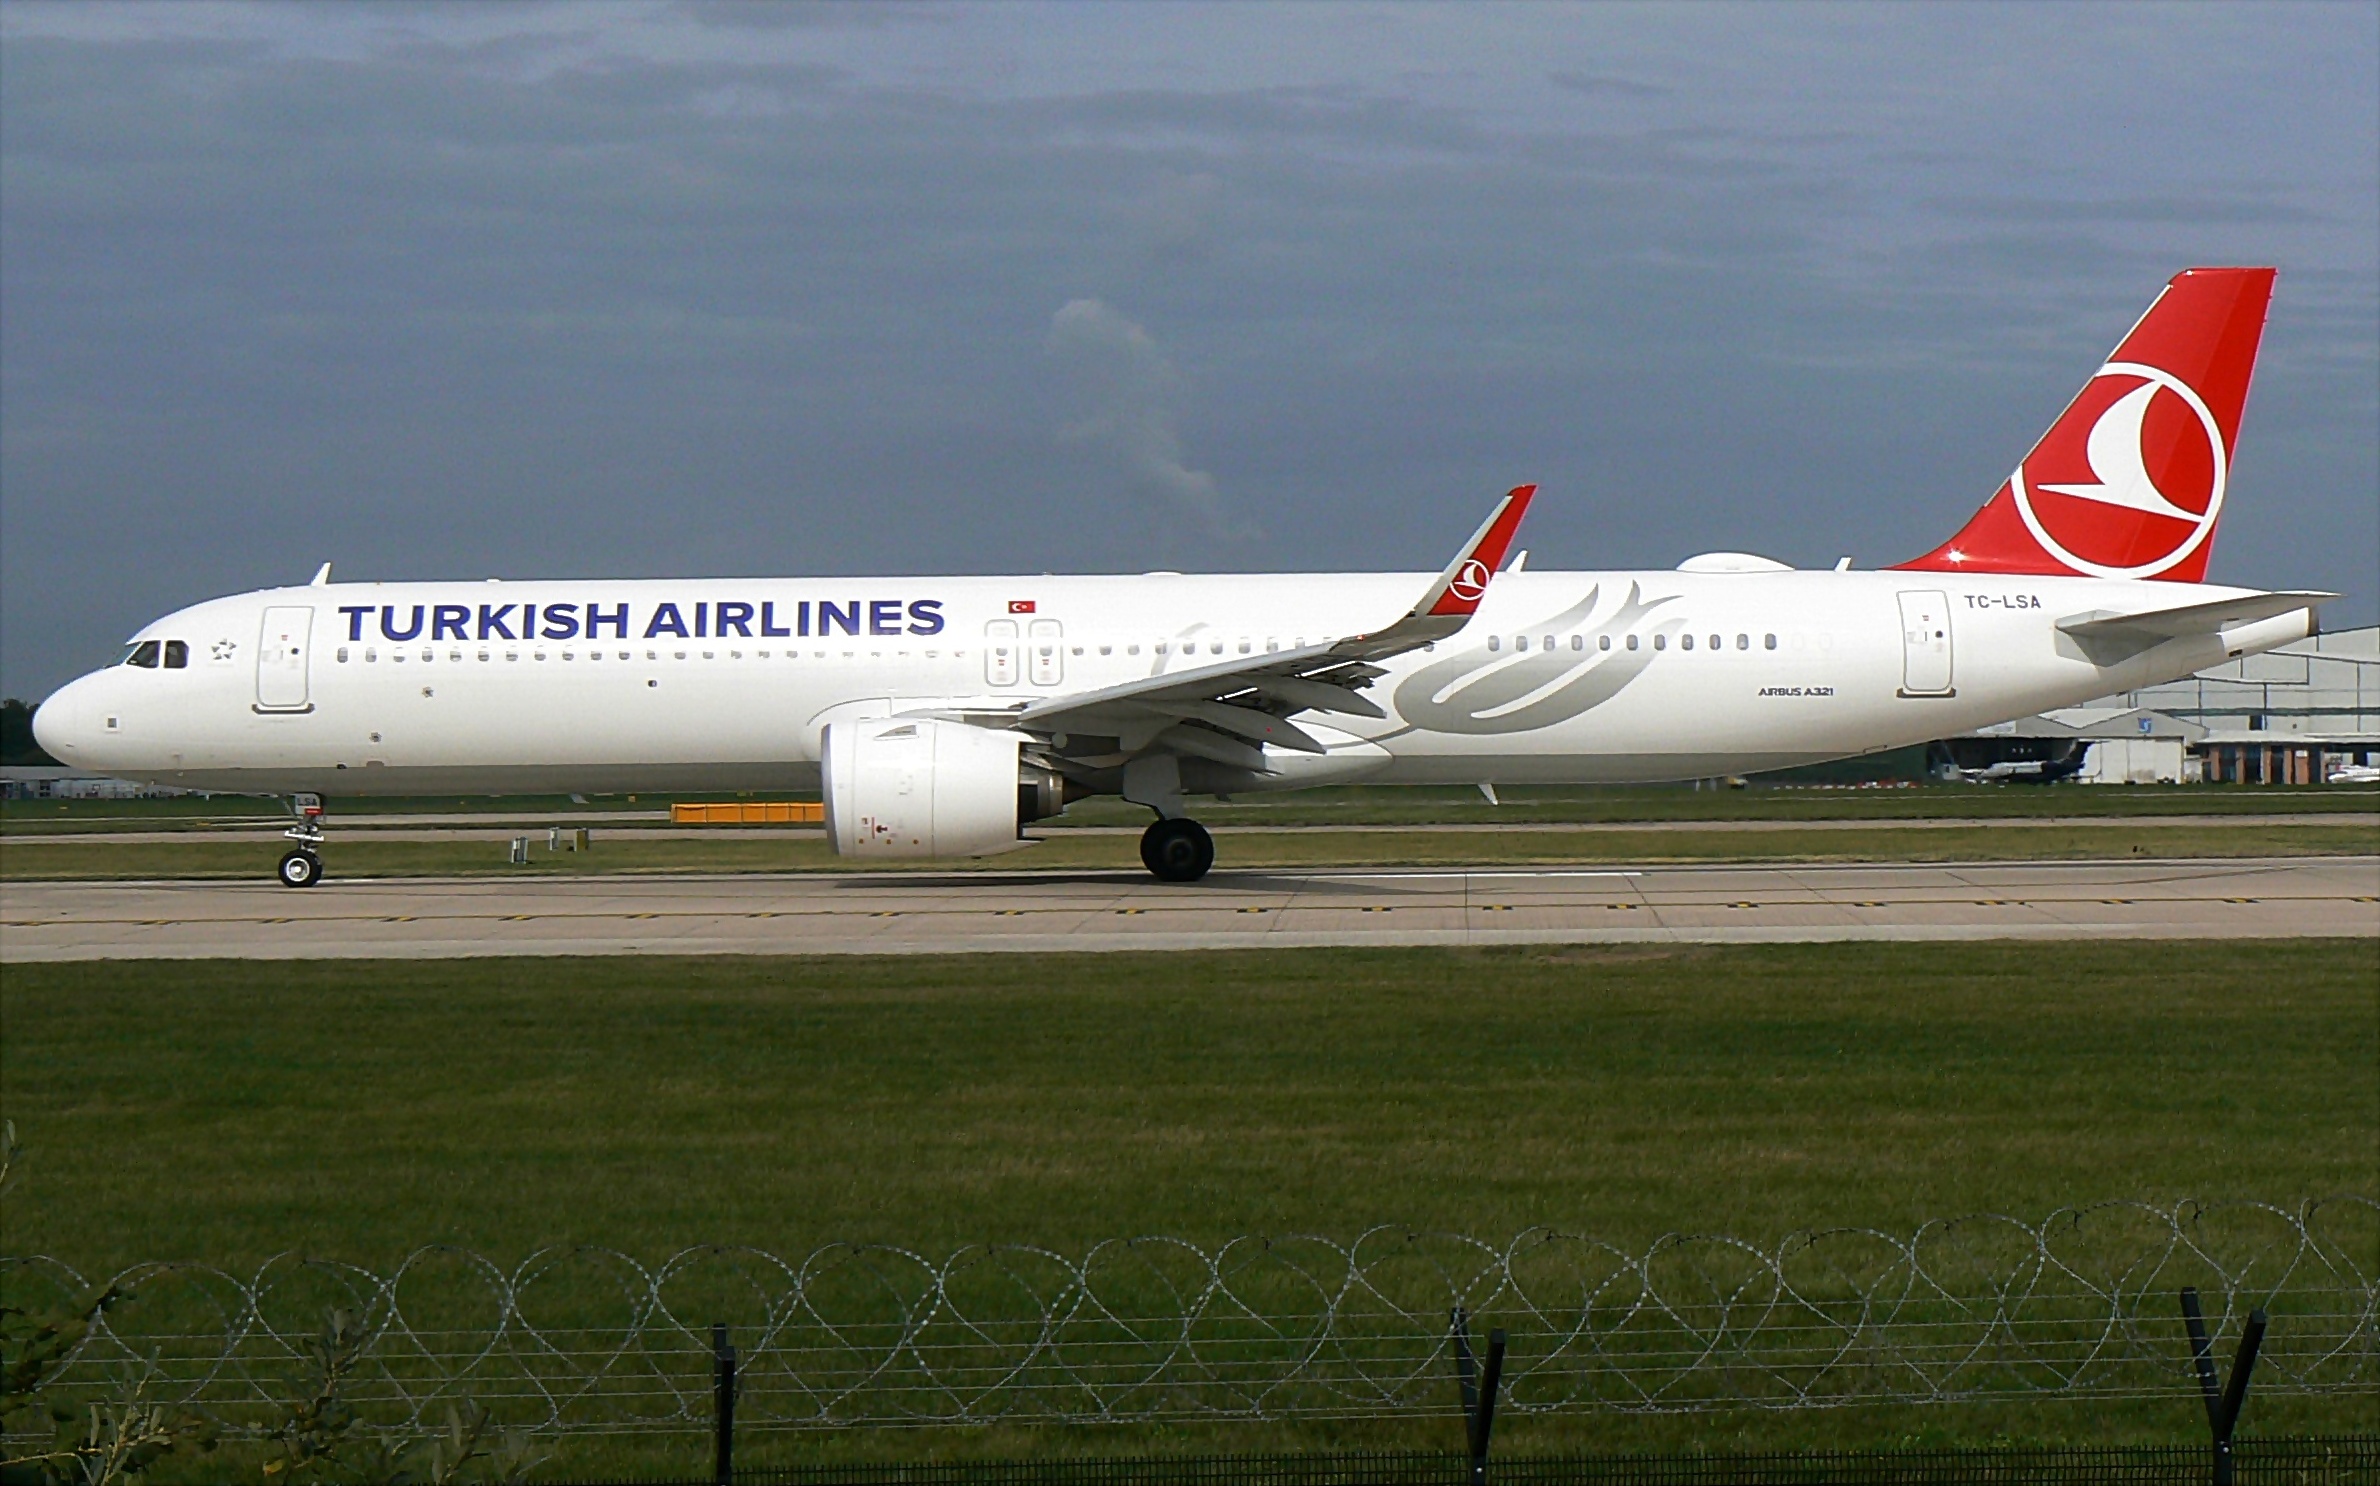 Airbus a321 turkish airlines. Airbus a320 Turkish Airlines.